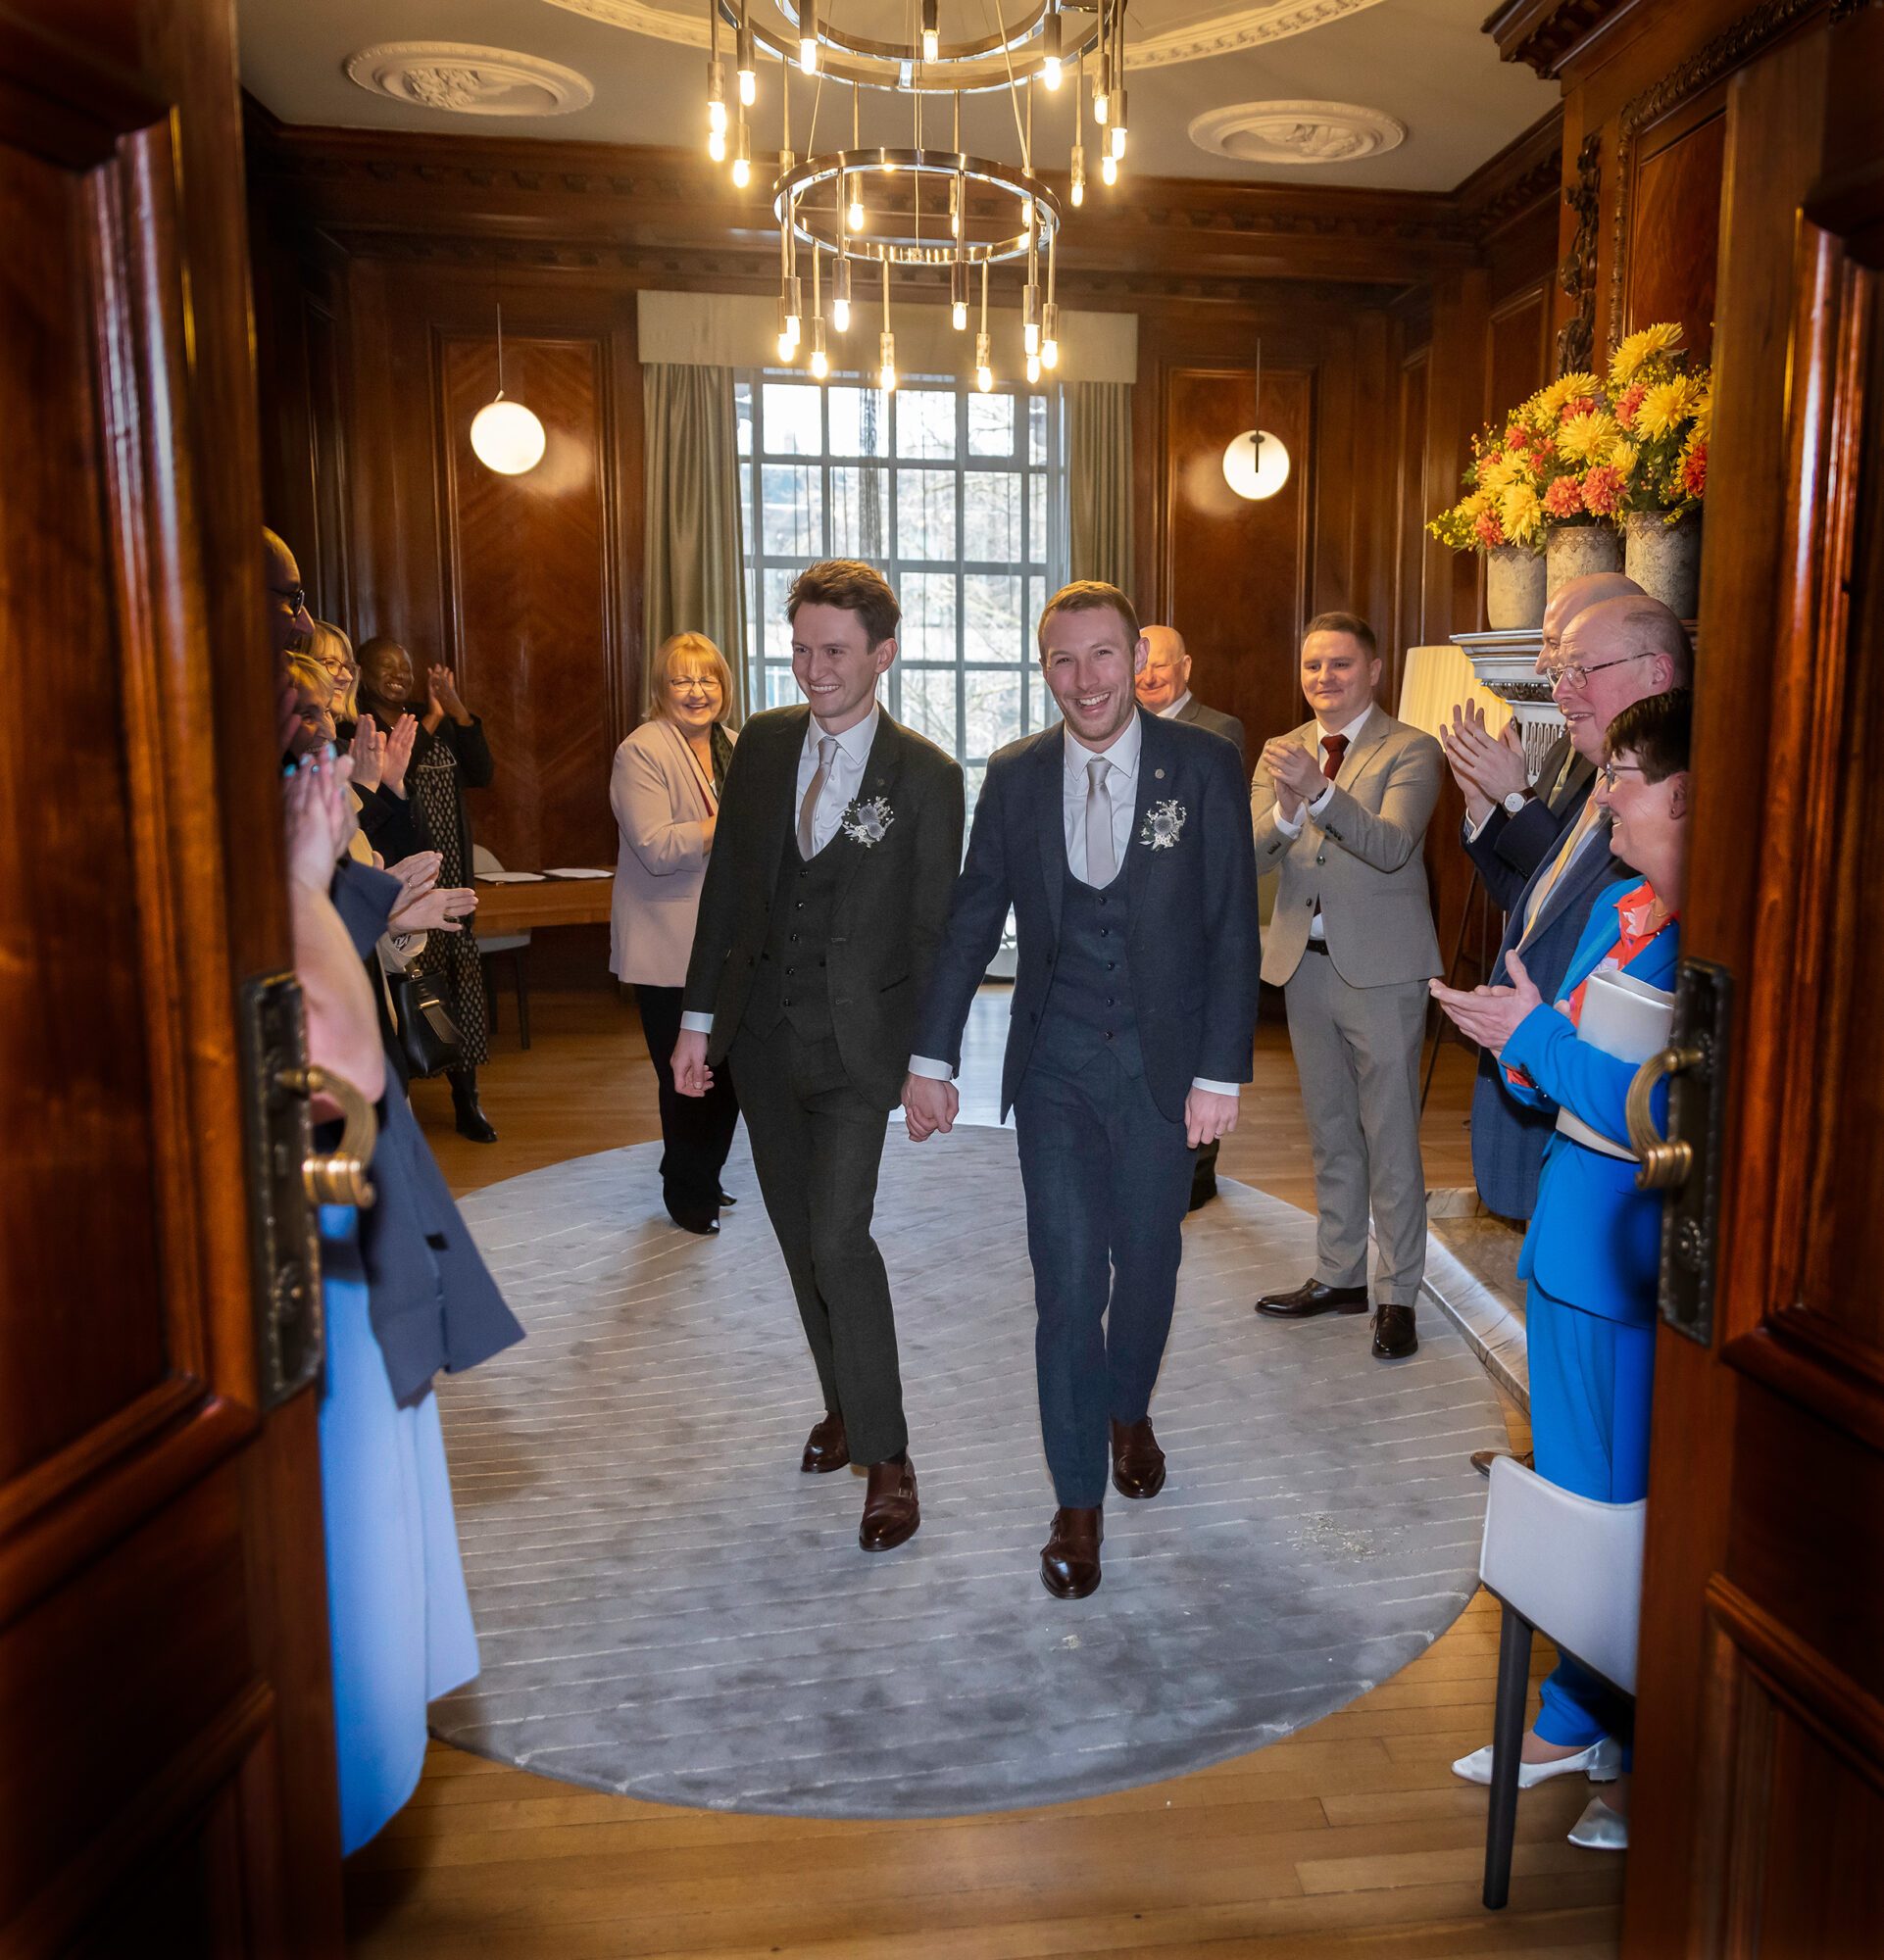 Grooms recessional Old Marylebone Town Hall wedding ceremony